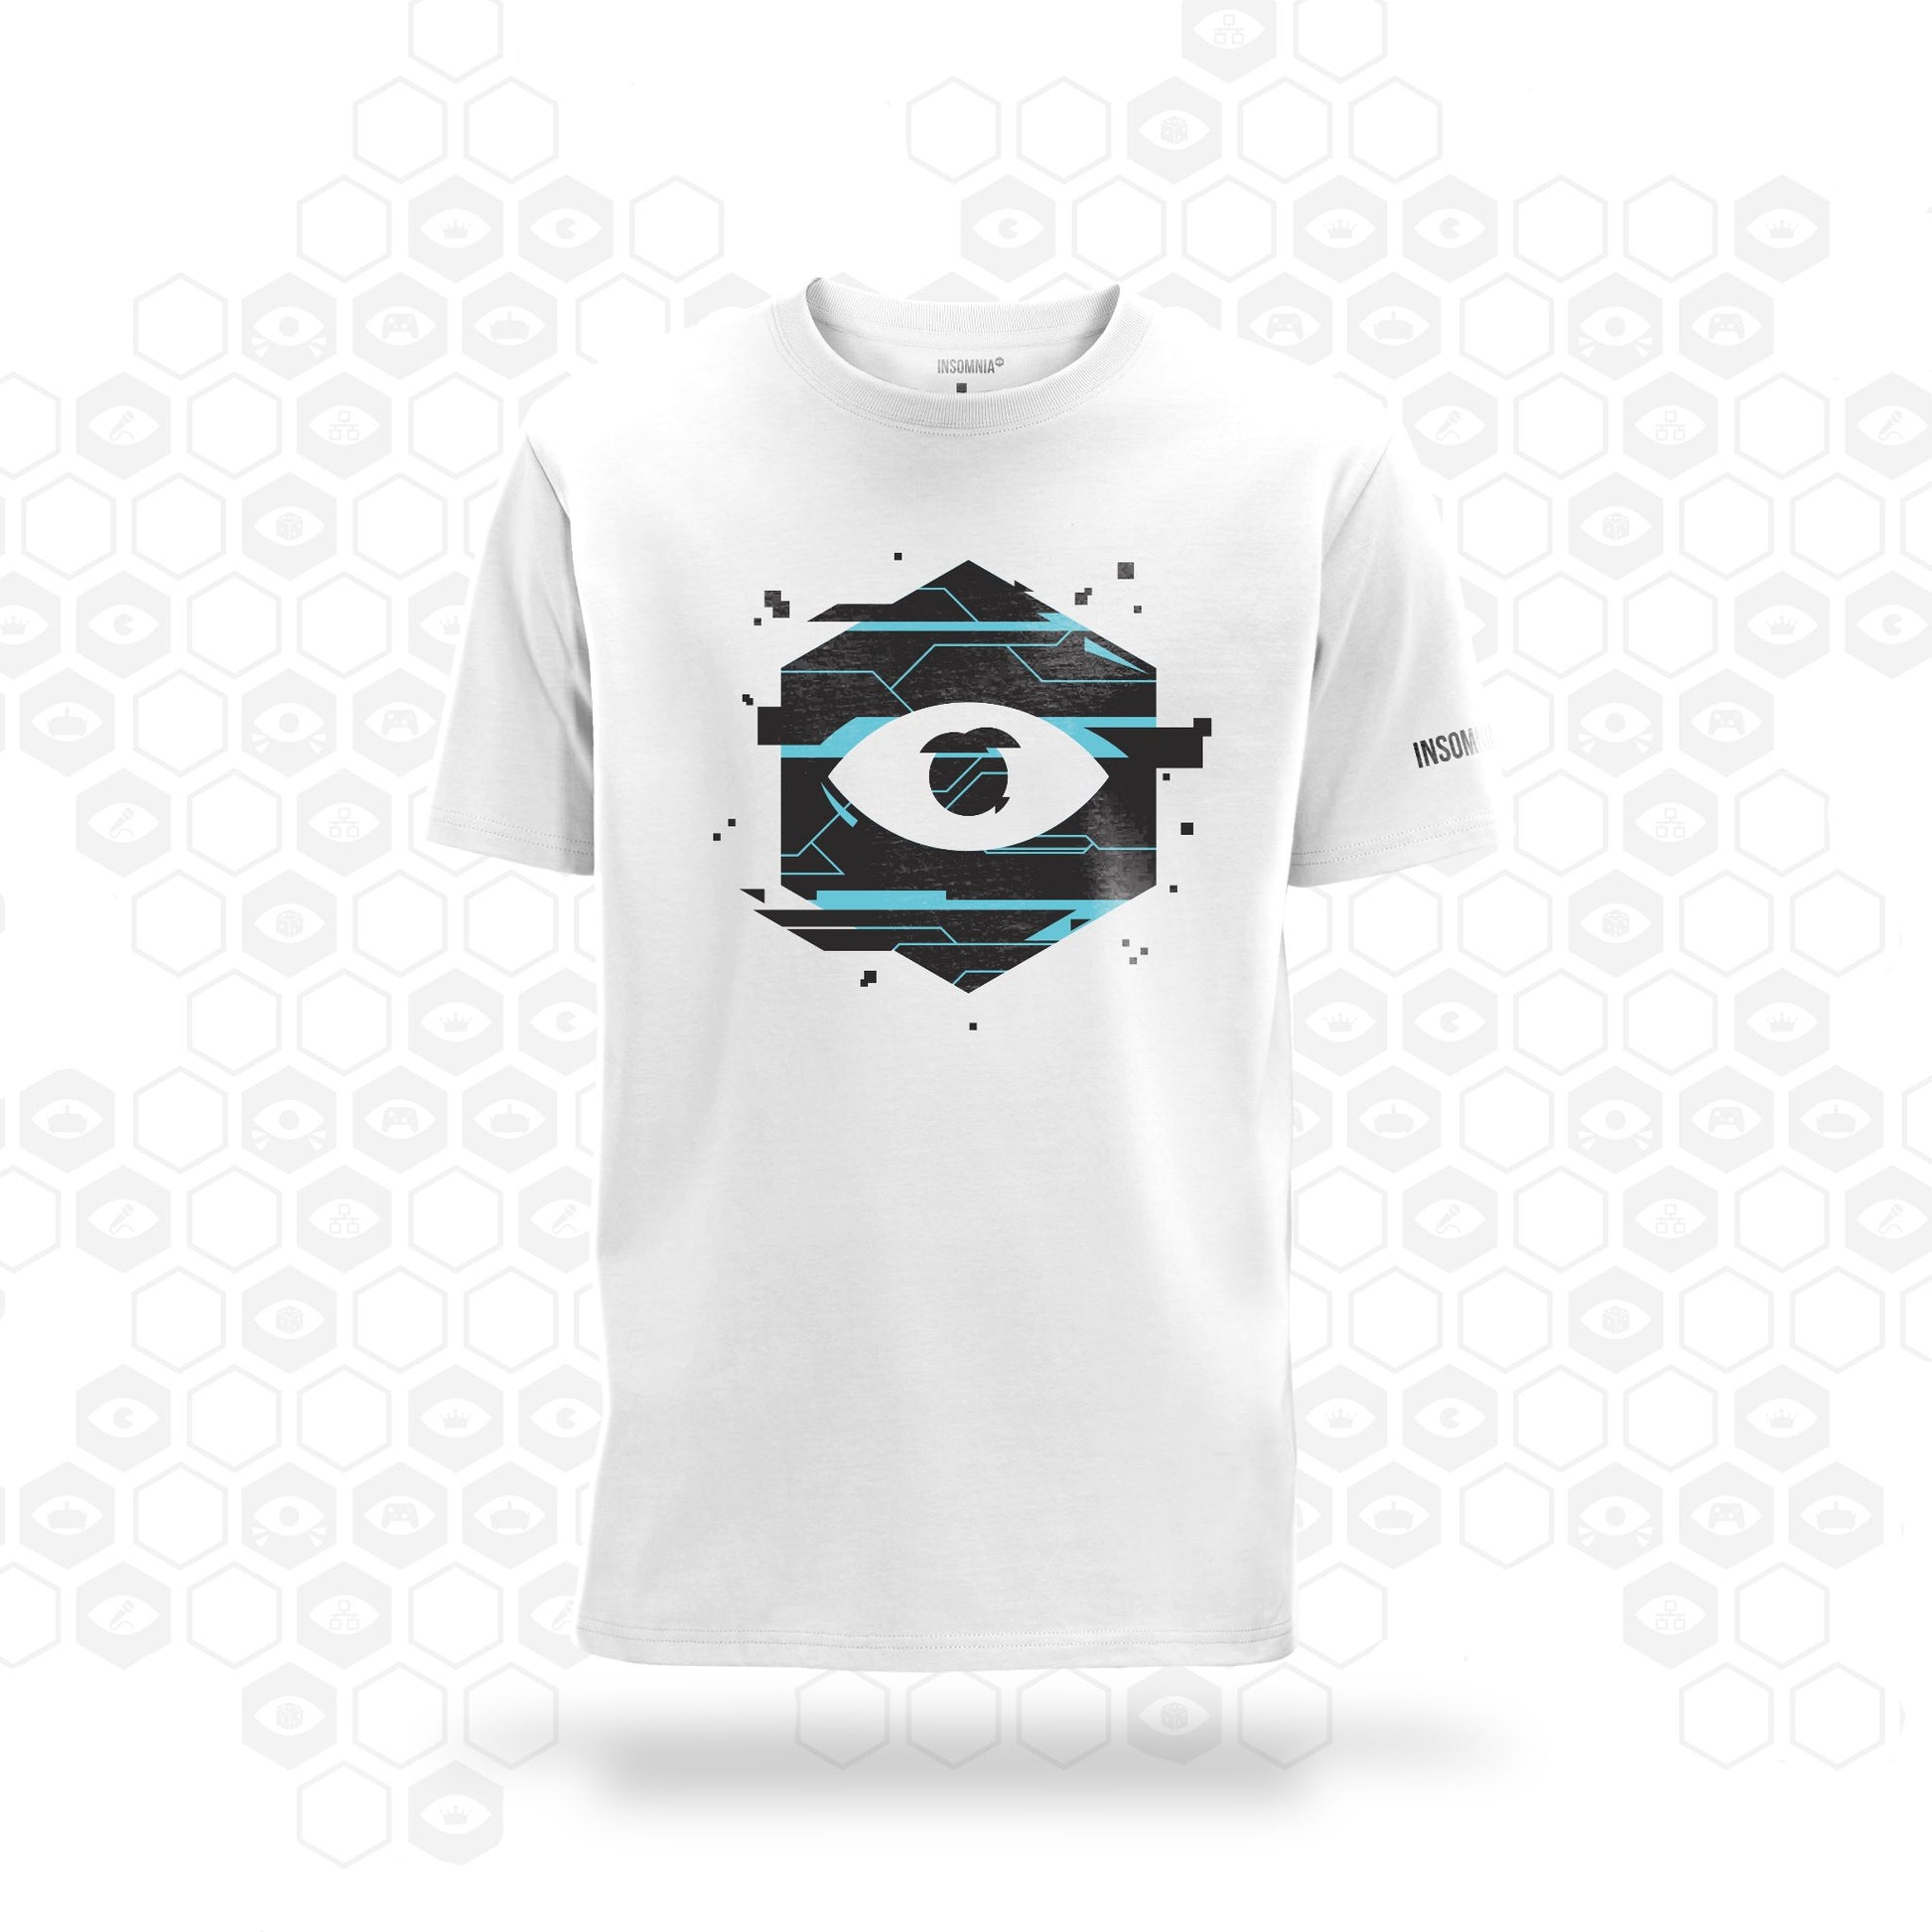 White Insomnia t-shirt with glitching eye design and insomnia logo on the sleeve